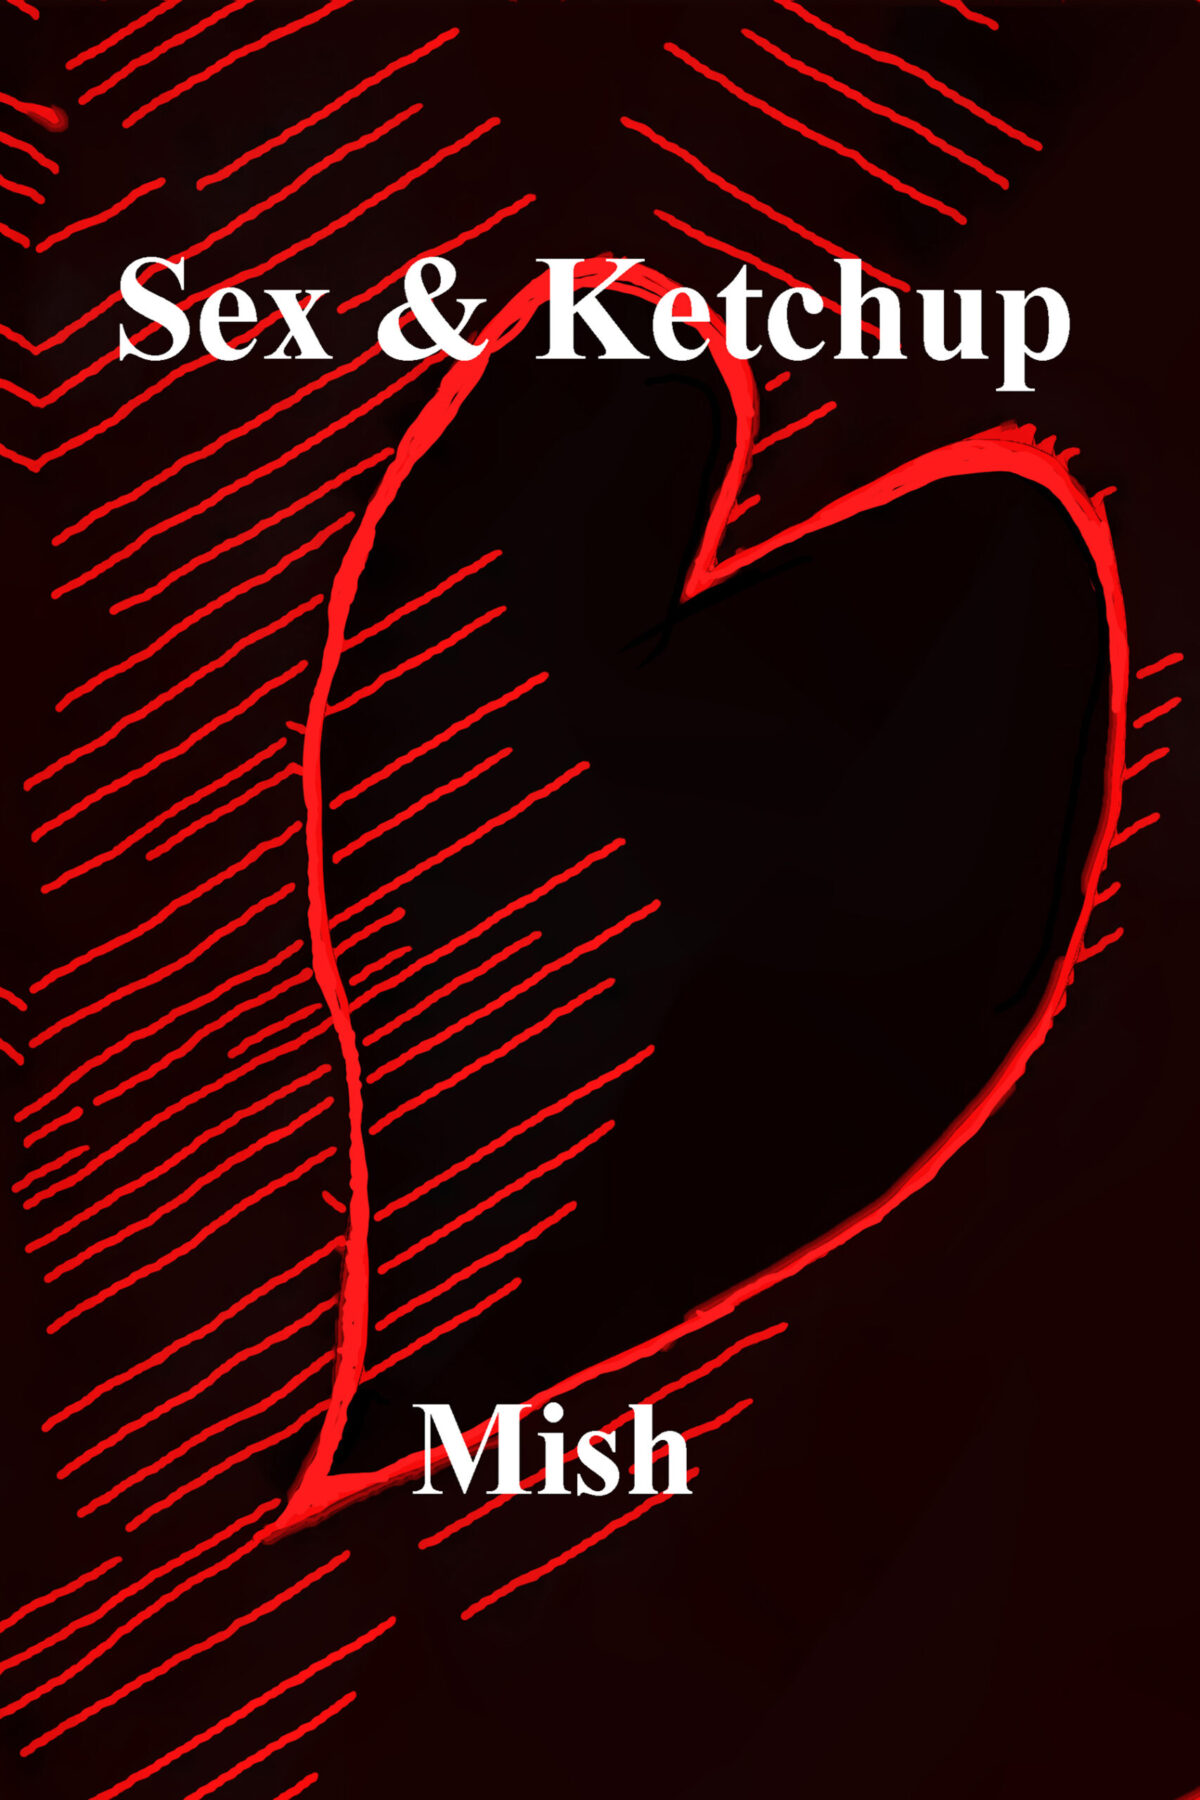 Book cover has a heart shape and diagonial lines in red on a black background, the title Sex & Ketchup up high and the author name Mish down low